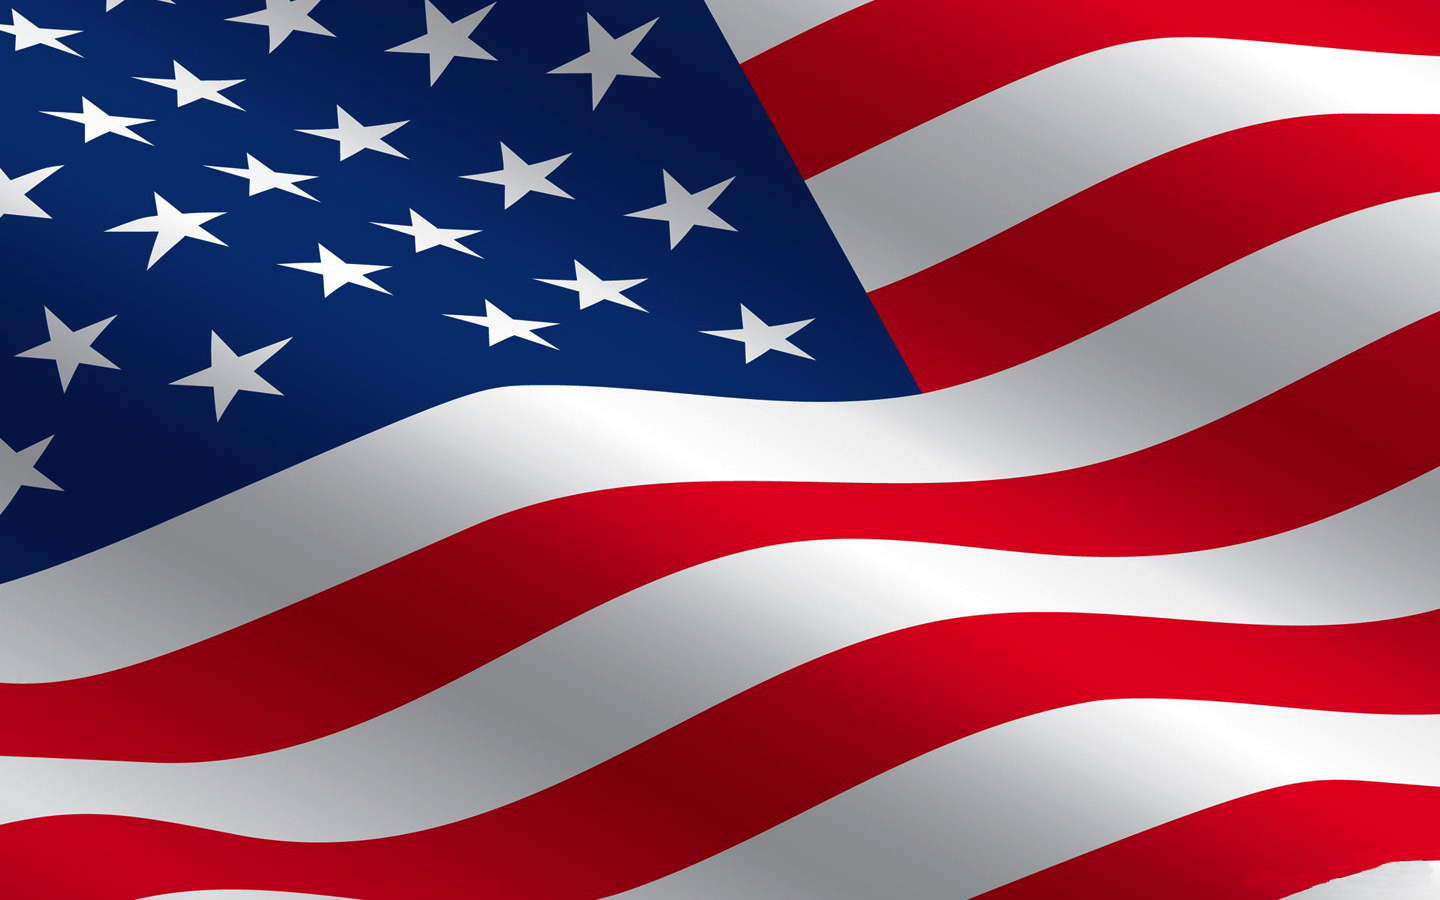 Us Flag 9336 Hd Wallpapers in Travel n World   Imagescicom